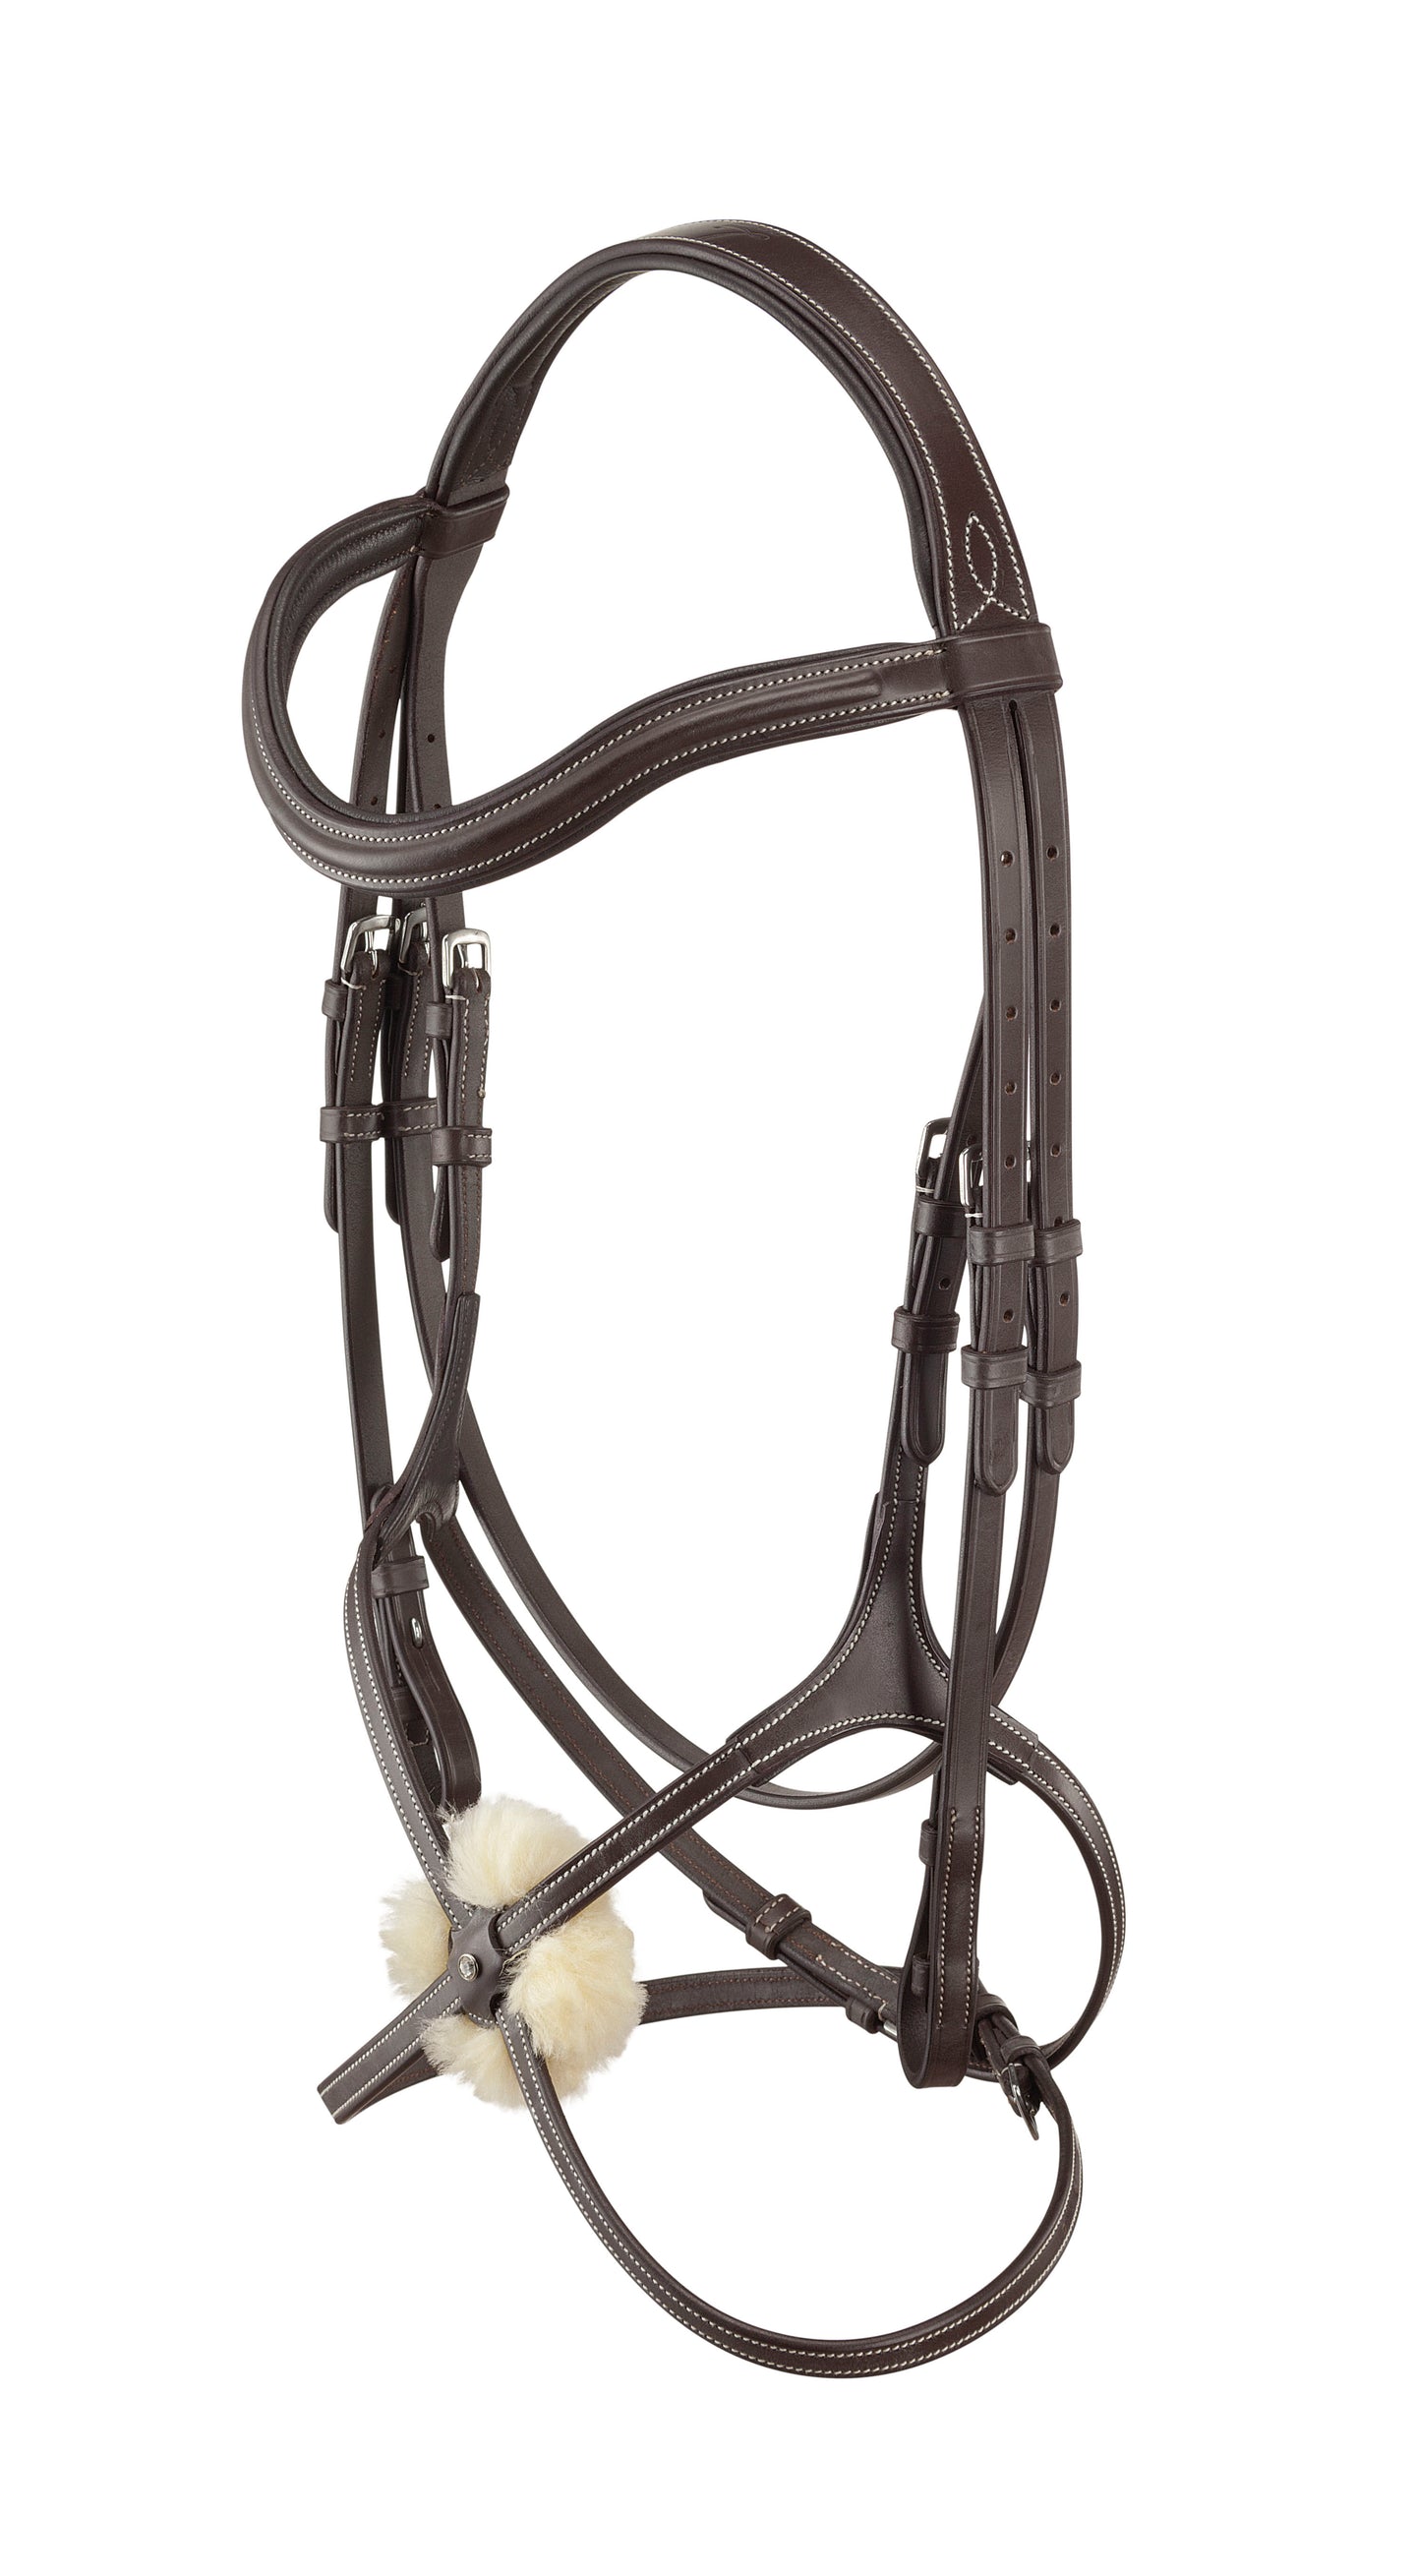 Mexican Bridles made out of English Leather